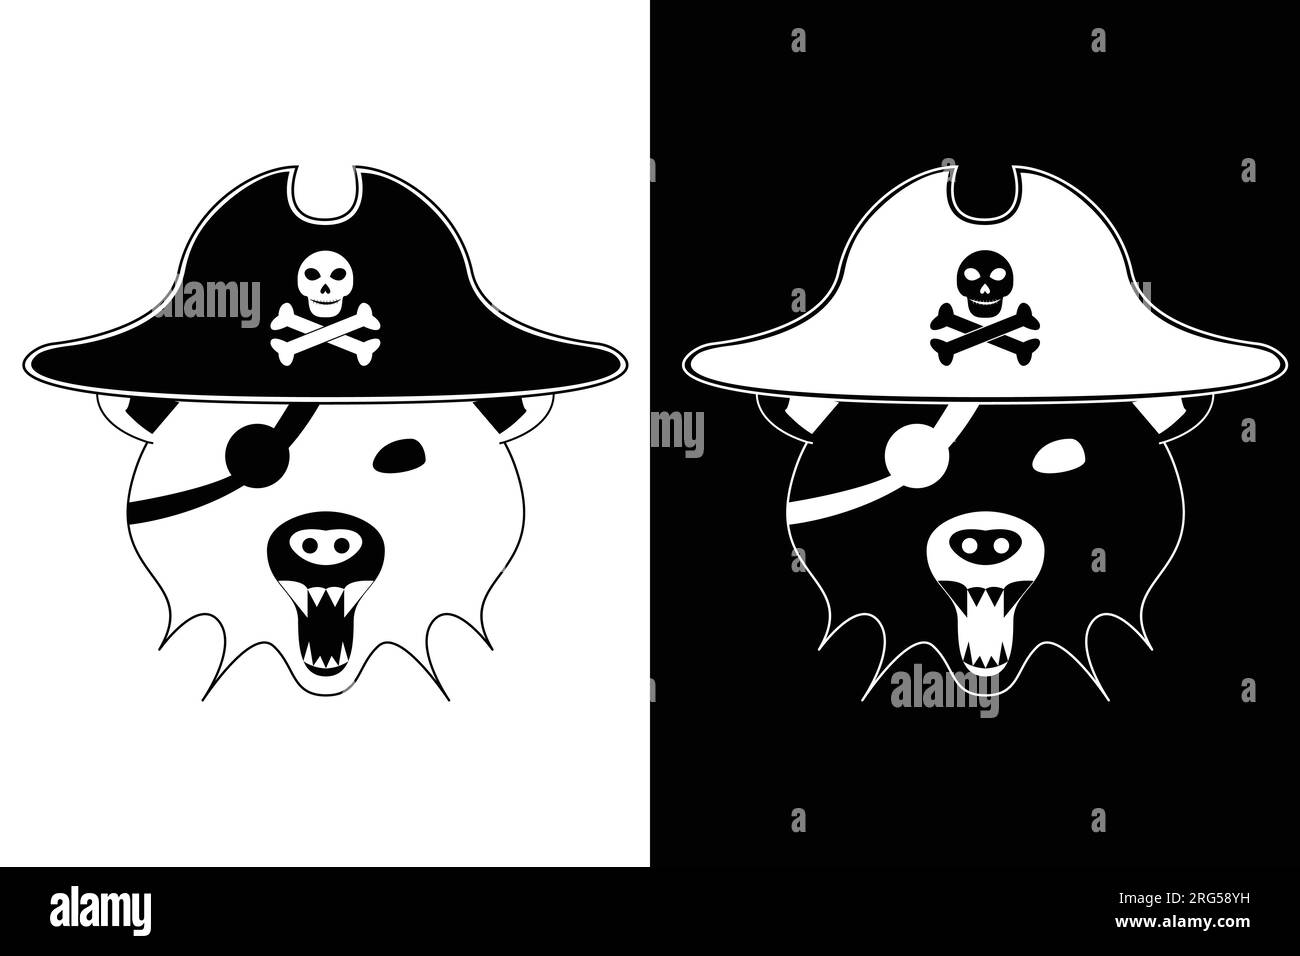 bear pirate face icon. vectors, illustrations, icons, avatars and logos. Stock Vector